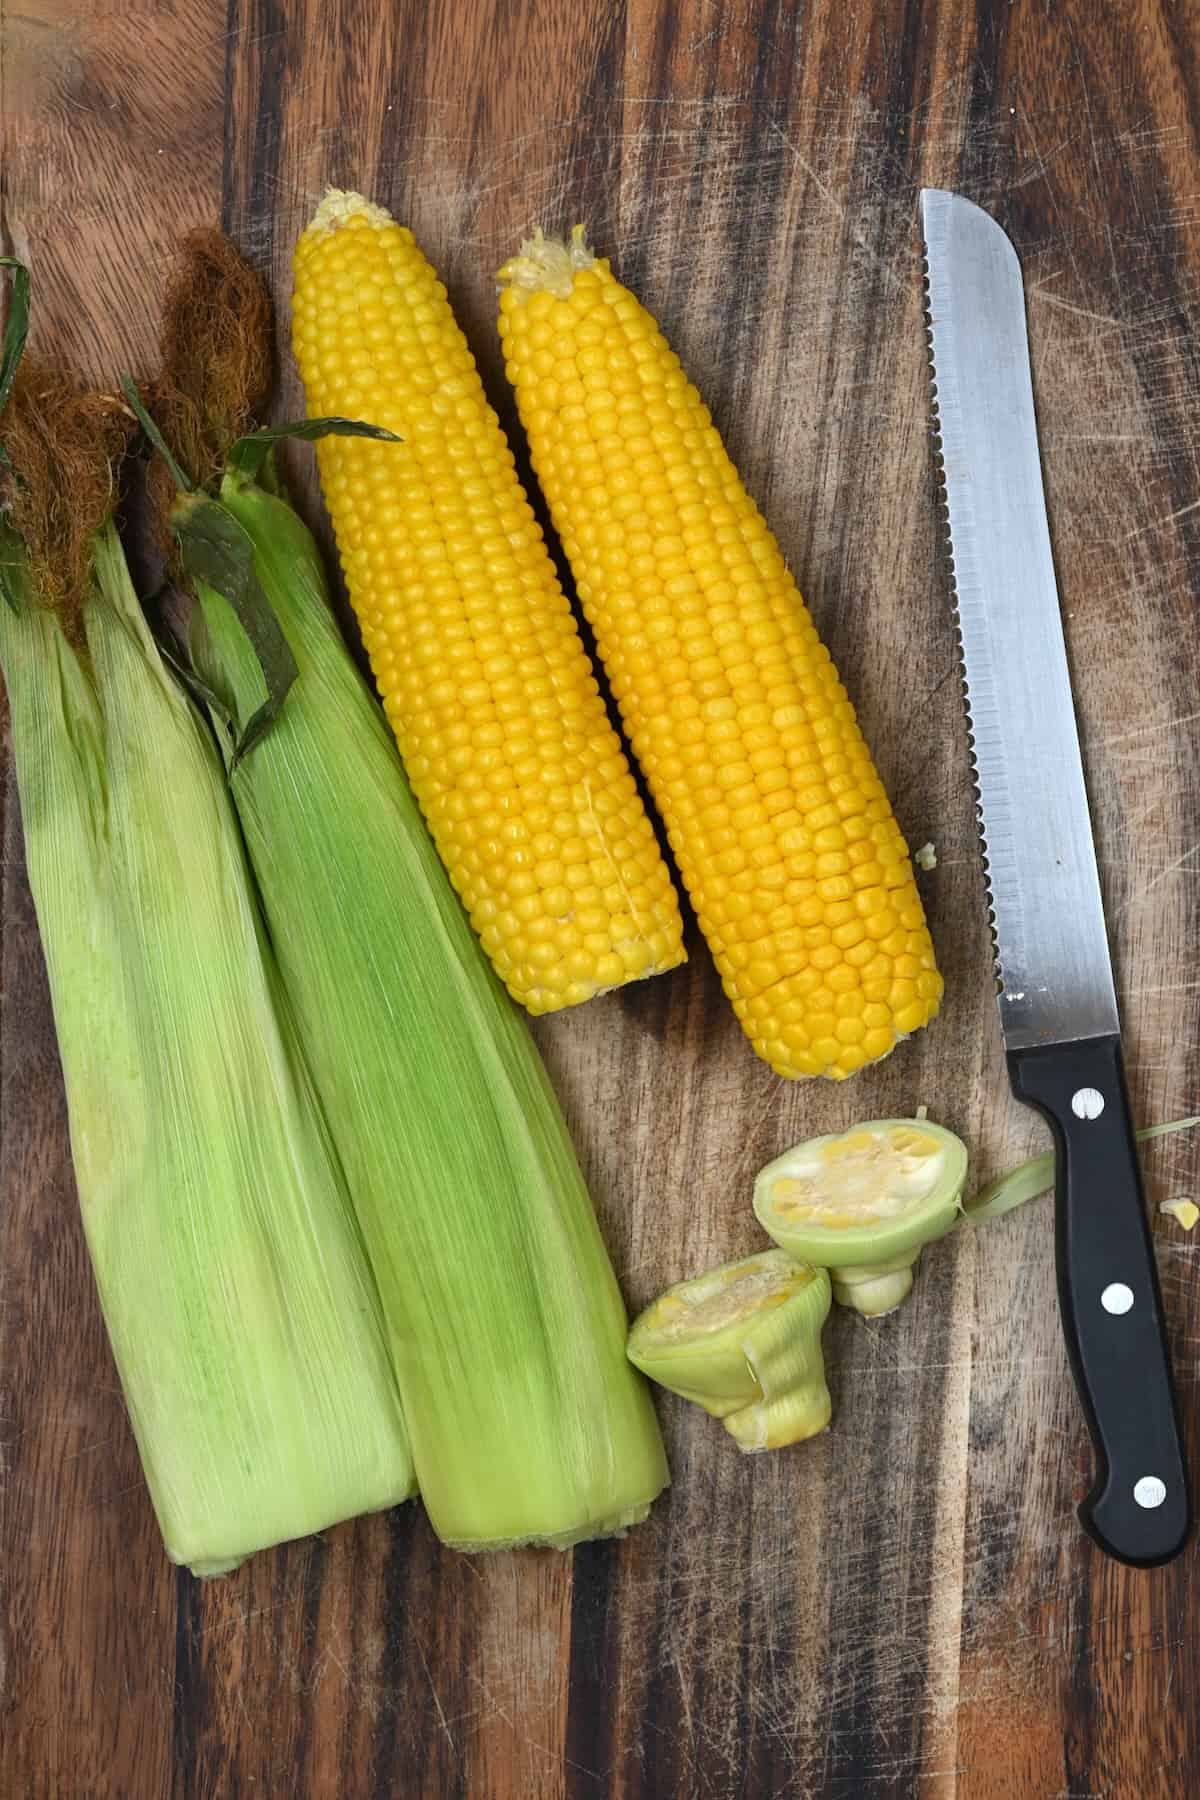 Microwaved corn and its husk on a cutting board